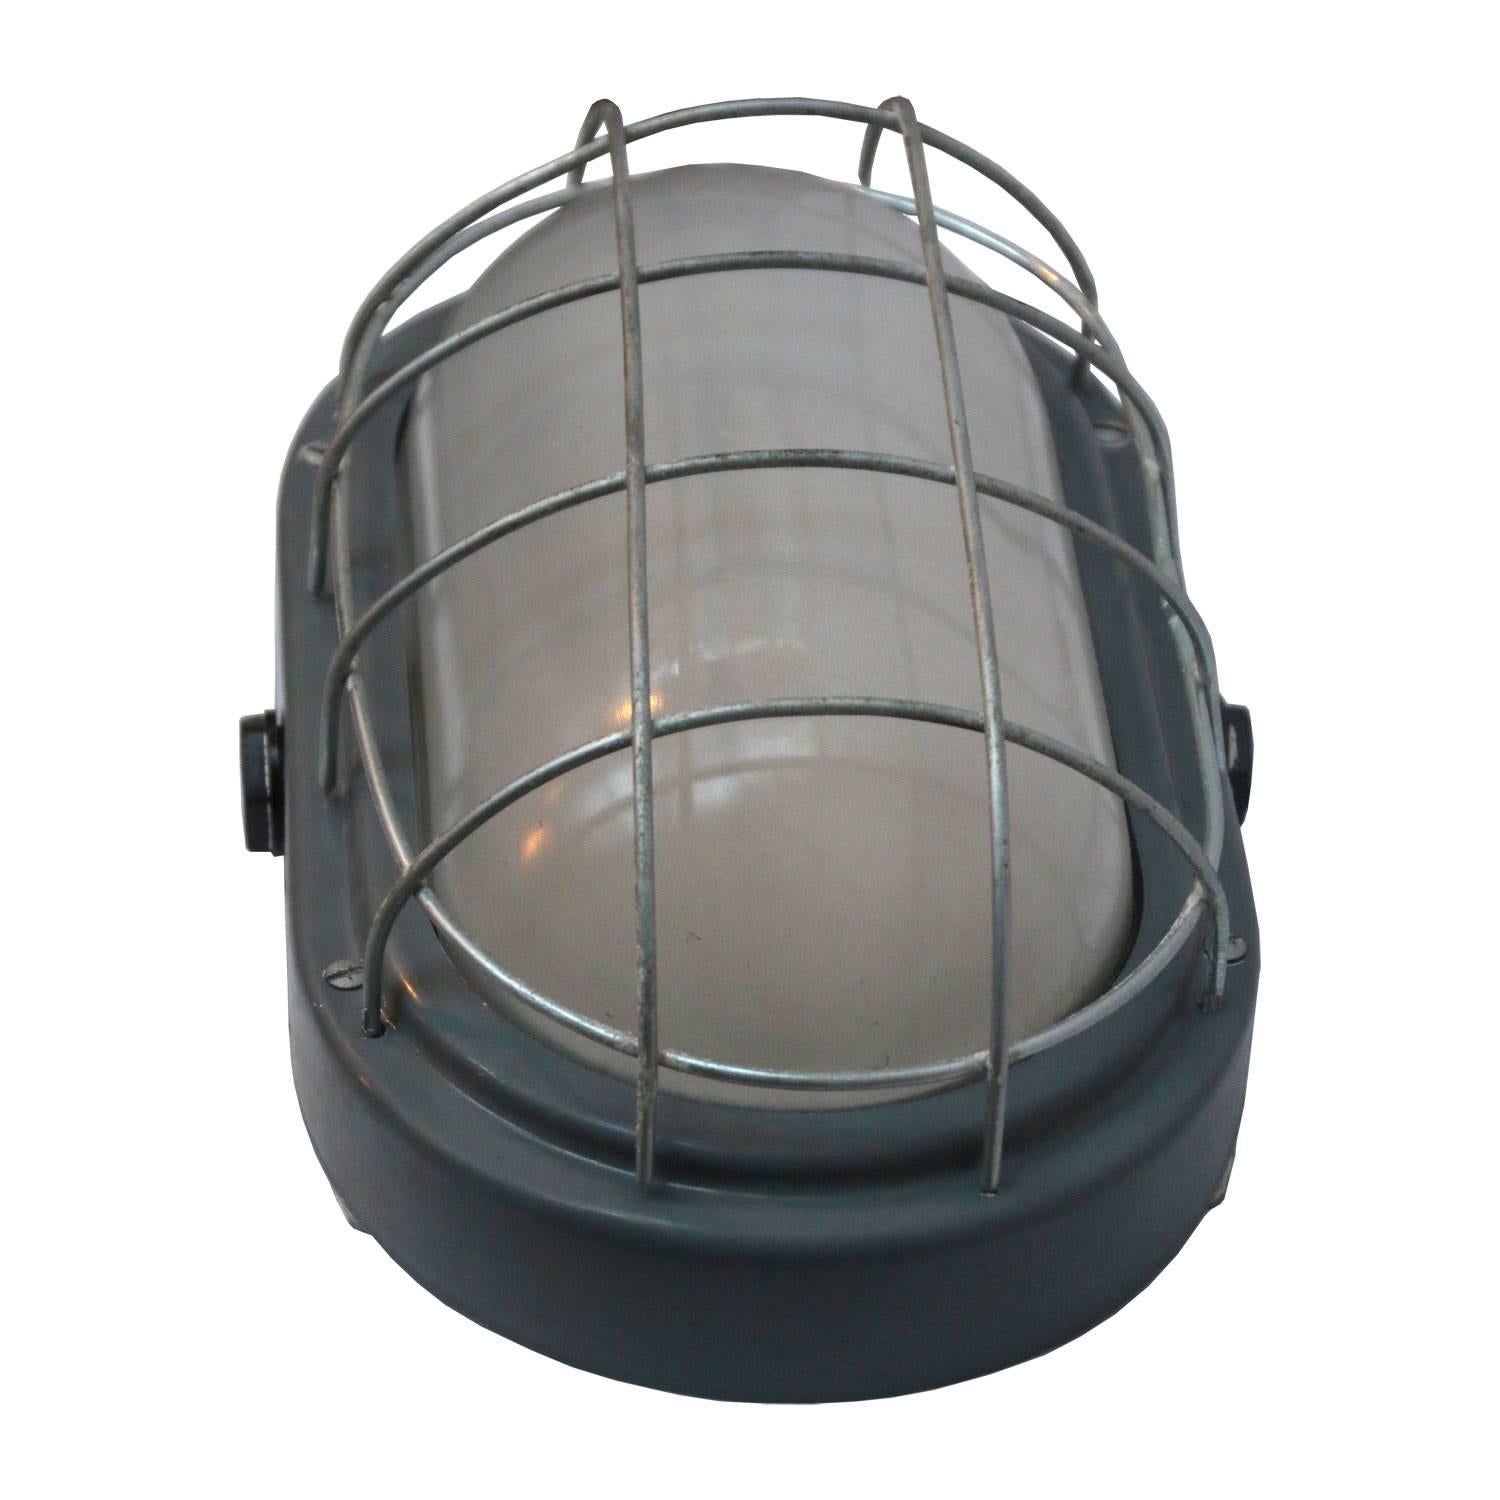 Czech Velim Industrial Wall or Ceiling Lamp